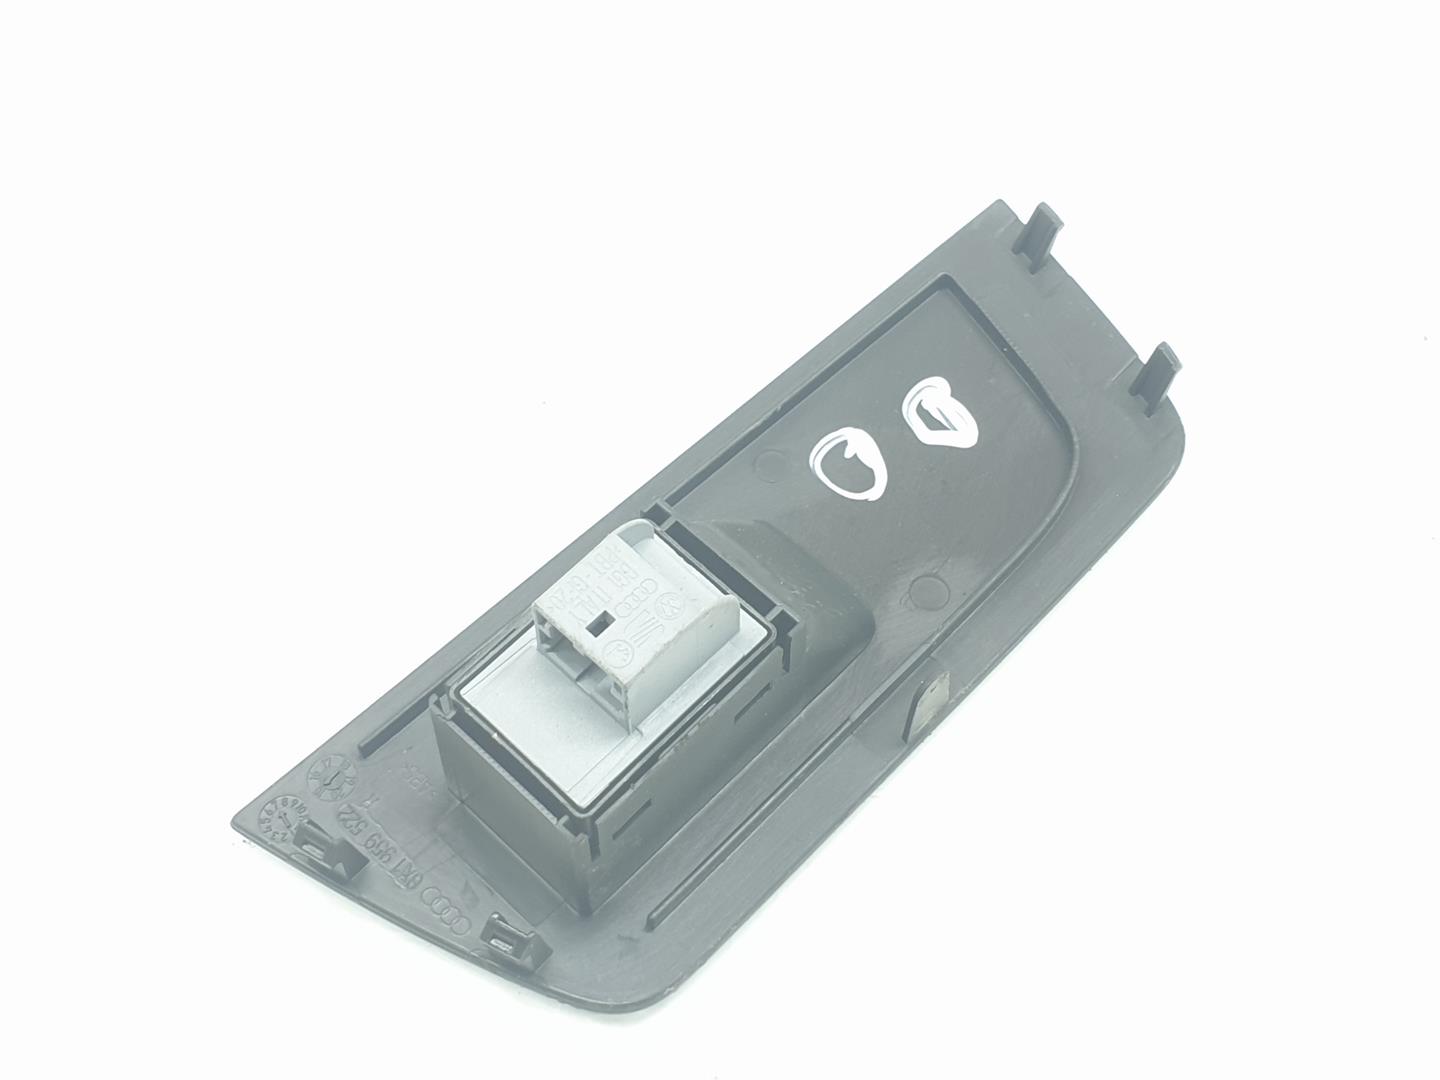 AUDI A1 8X (2010-2020) Front Right Door Window Switch 4H0959855A, 4H0959855A 23499636